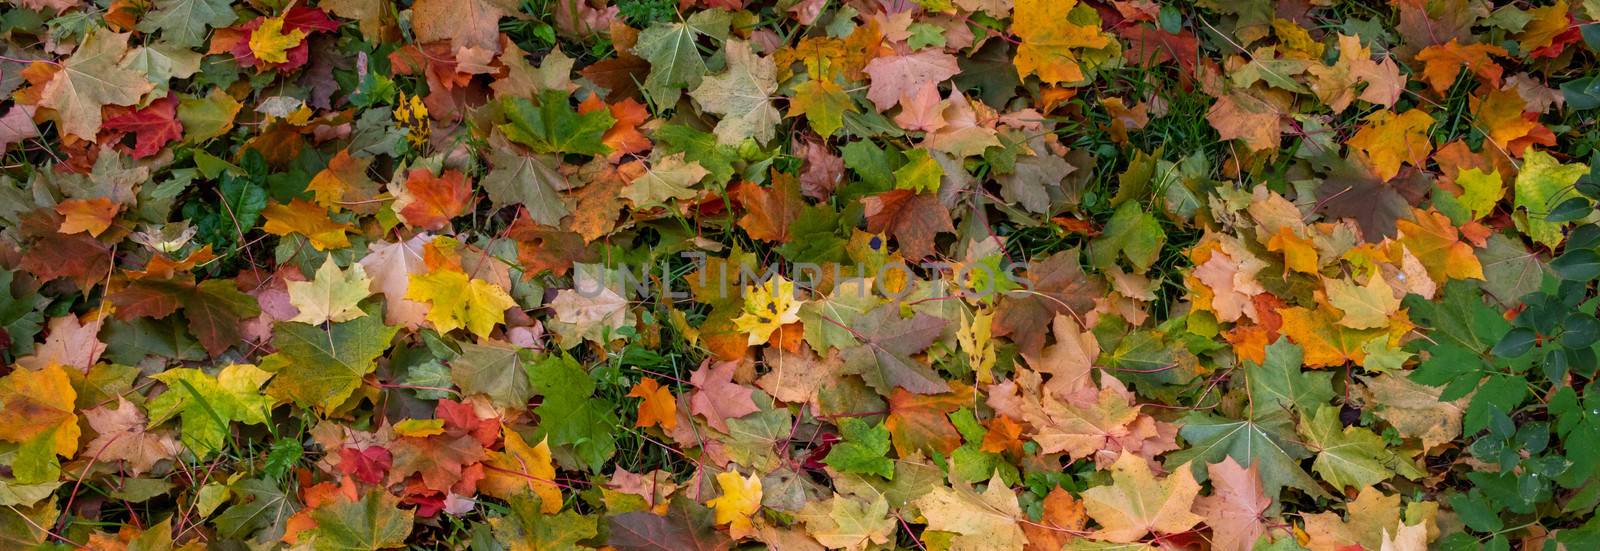 Panorama of autumn leaves. Yellow, orange and red September autumn maple leaves on the ground in a beautiful autumn Park by lapushka62